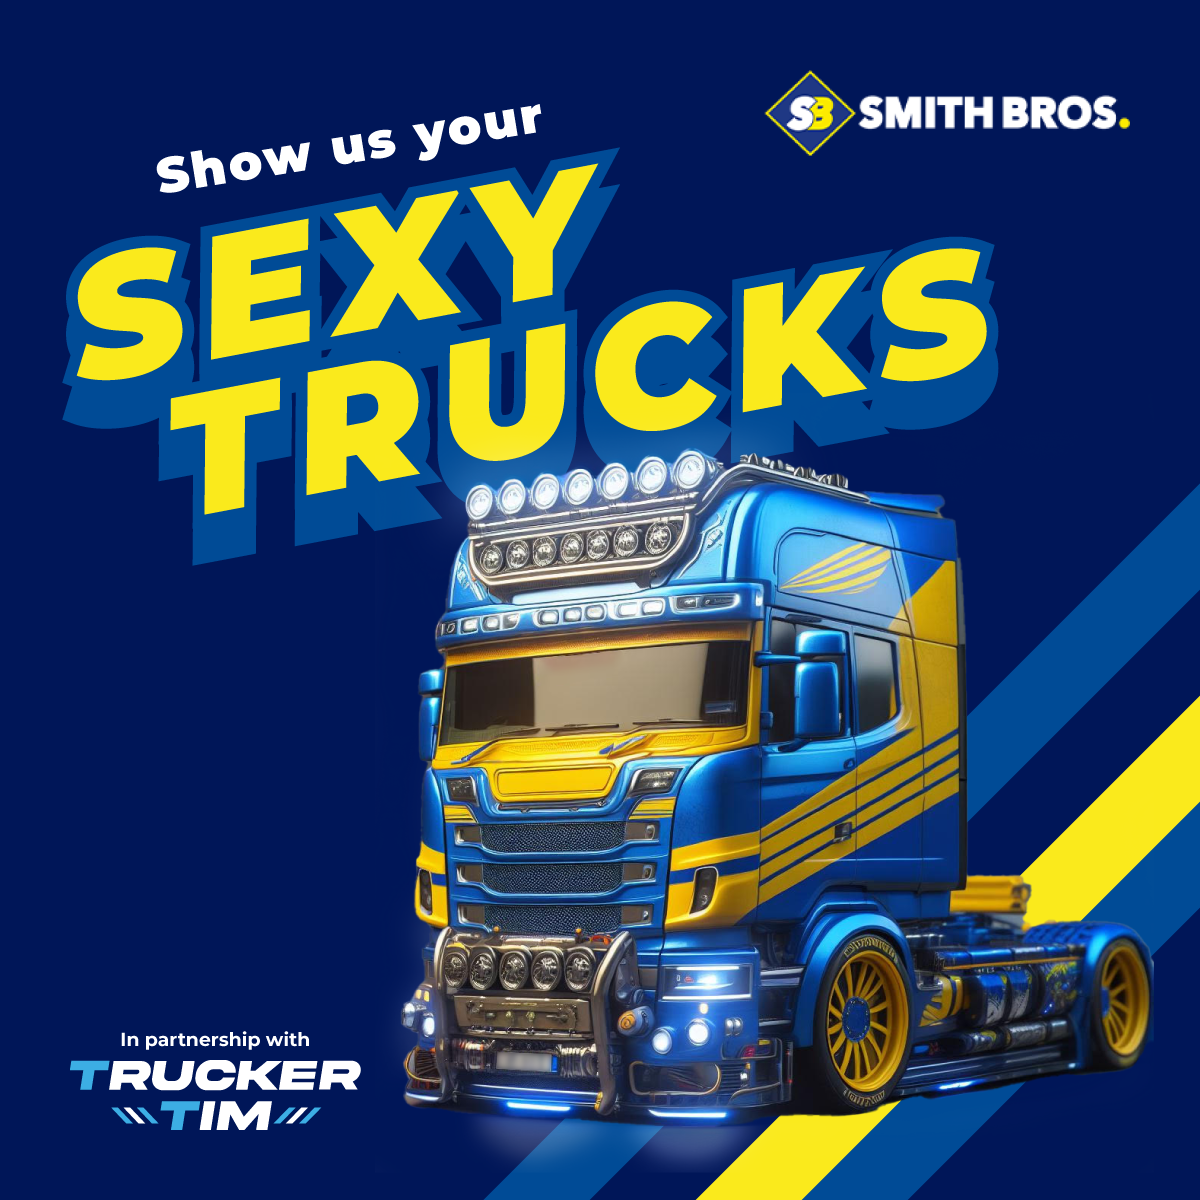 Sexy Trucks: Competition To Find The UK’s Sexiest Truck